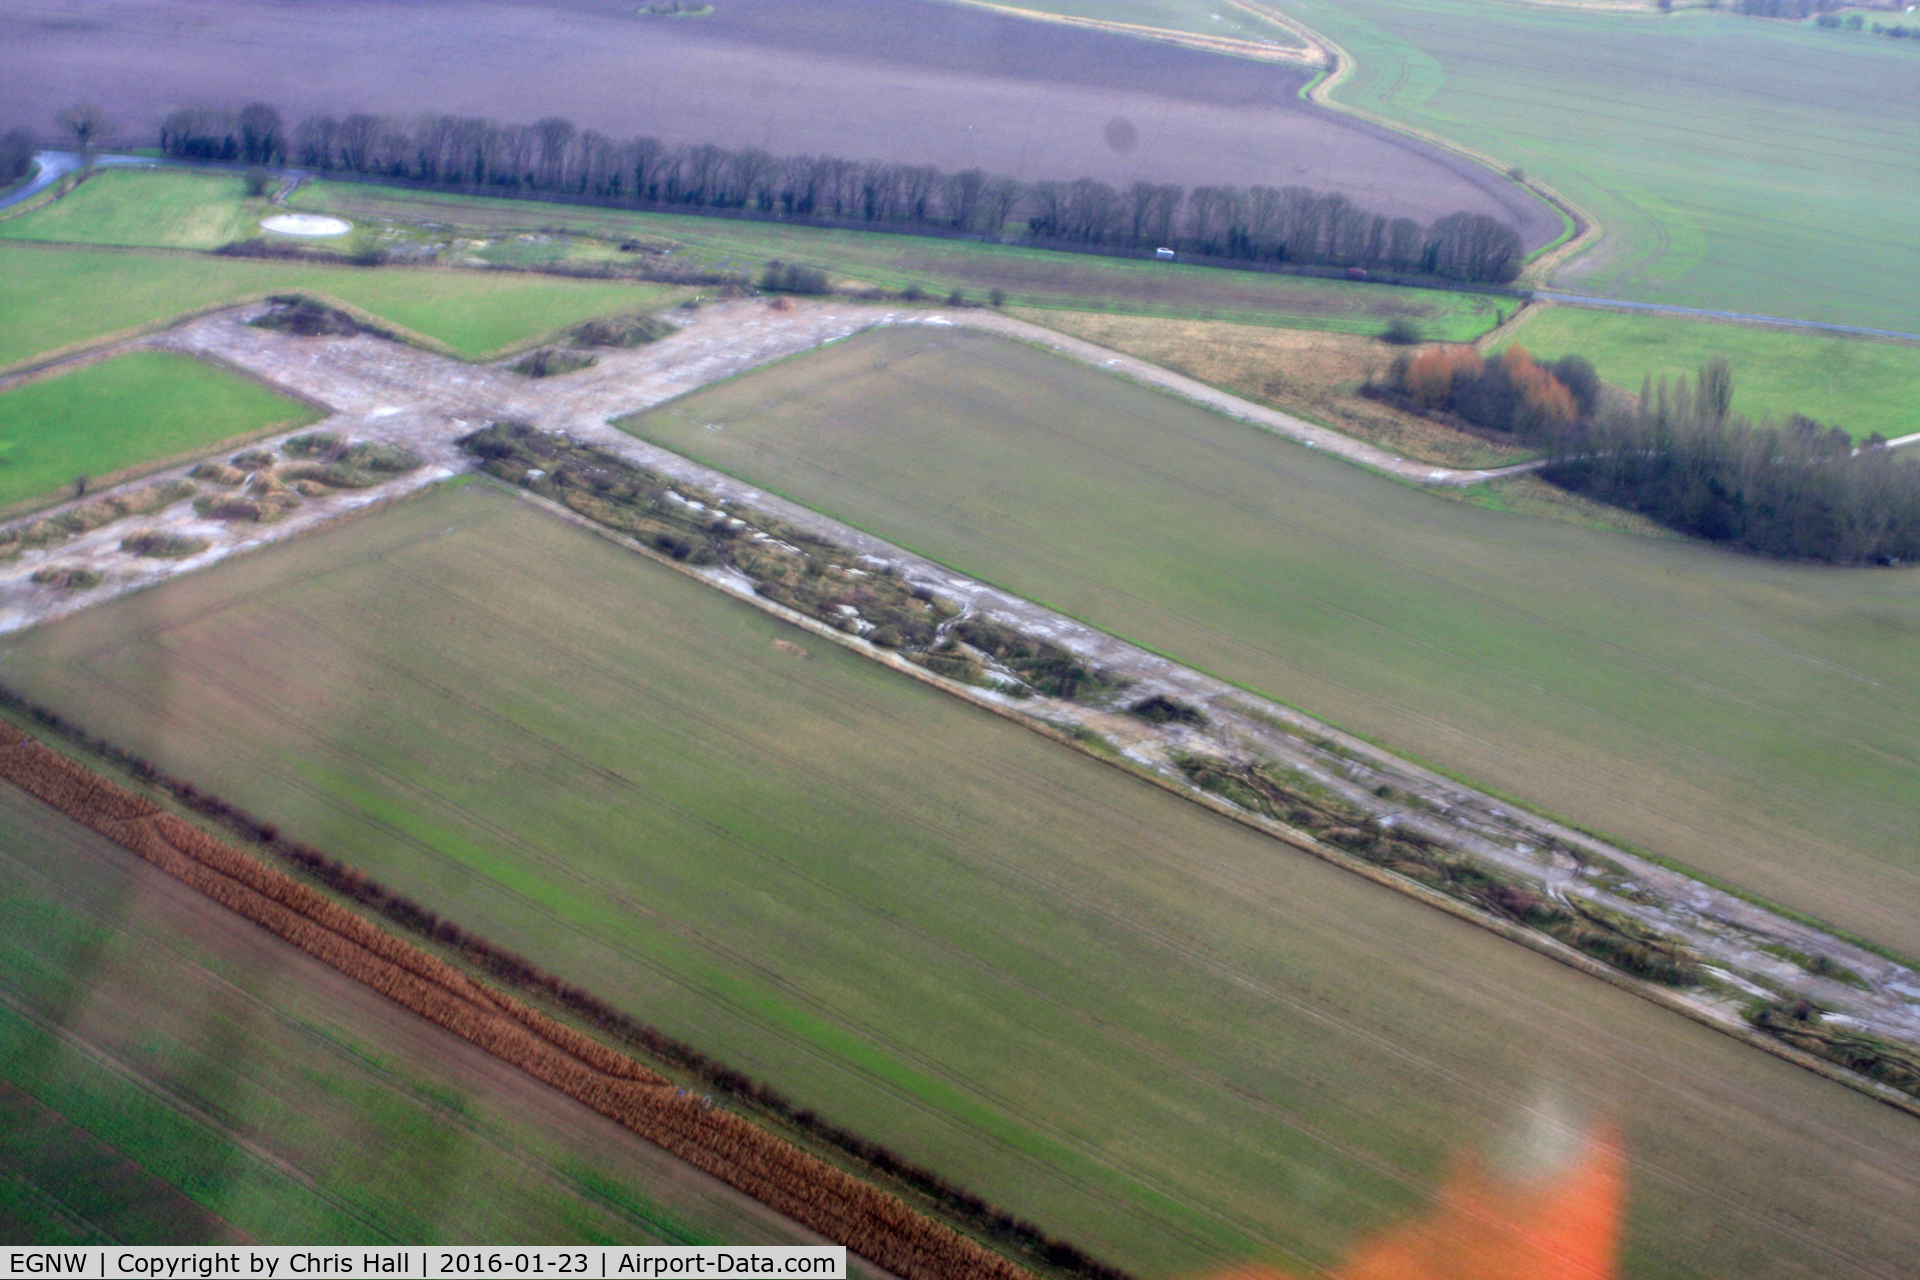 Wickenby Aerodrome Airport, Lincoln, England United Kingdom (EGNW) - the disused southern part of Wickenby airfield